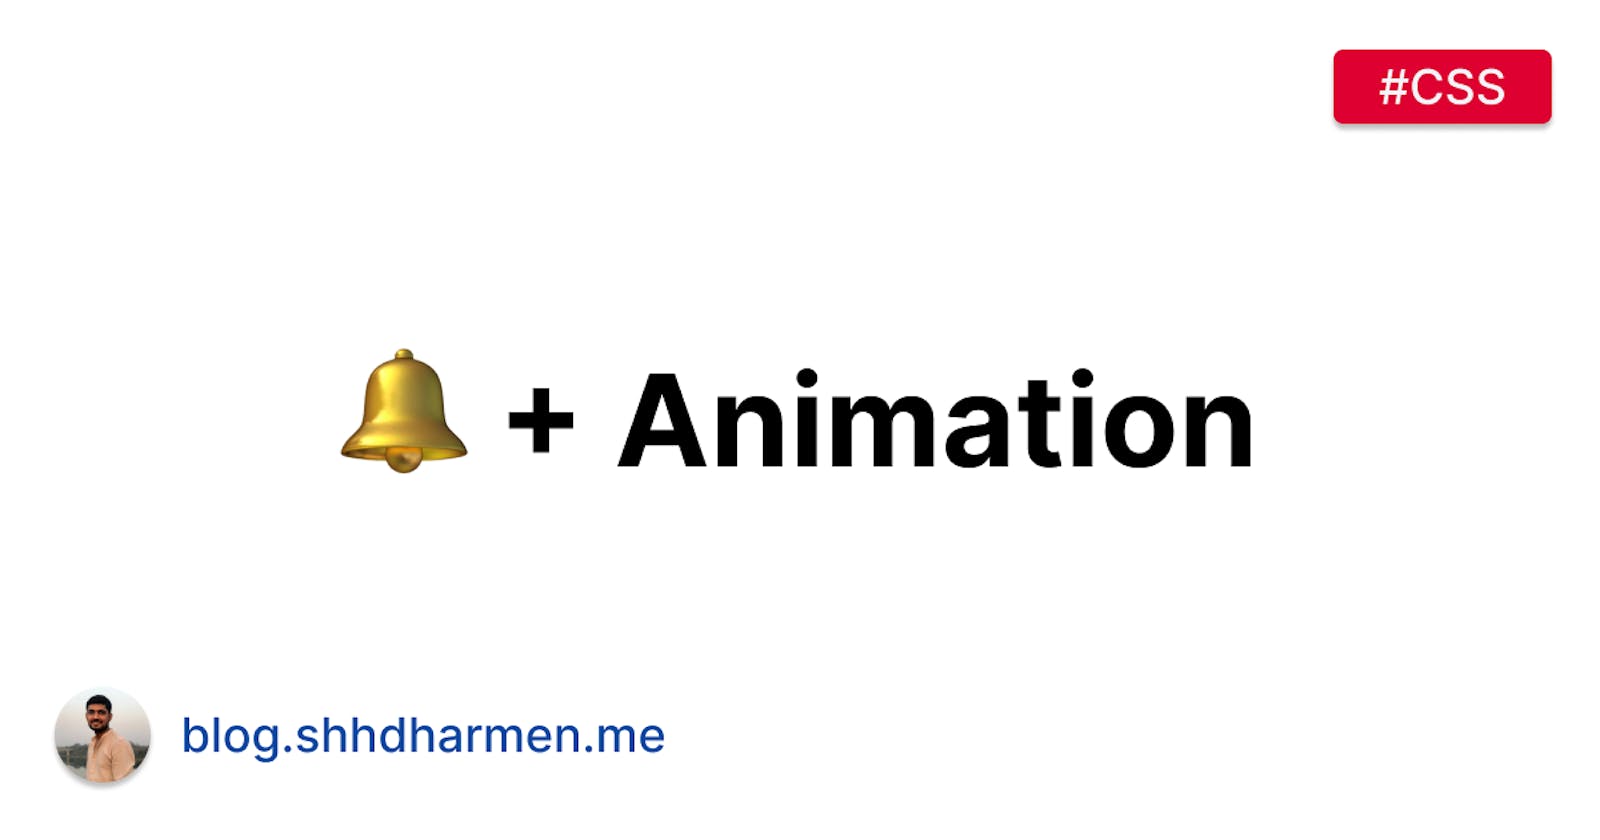 Animation can make bell🔔 much more than emoji!